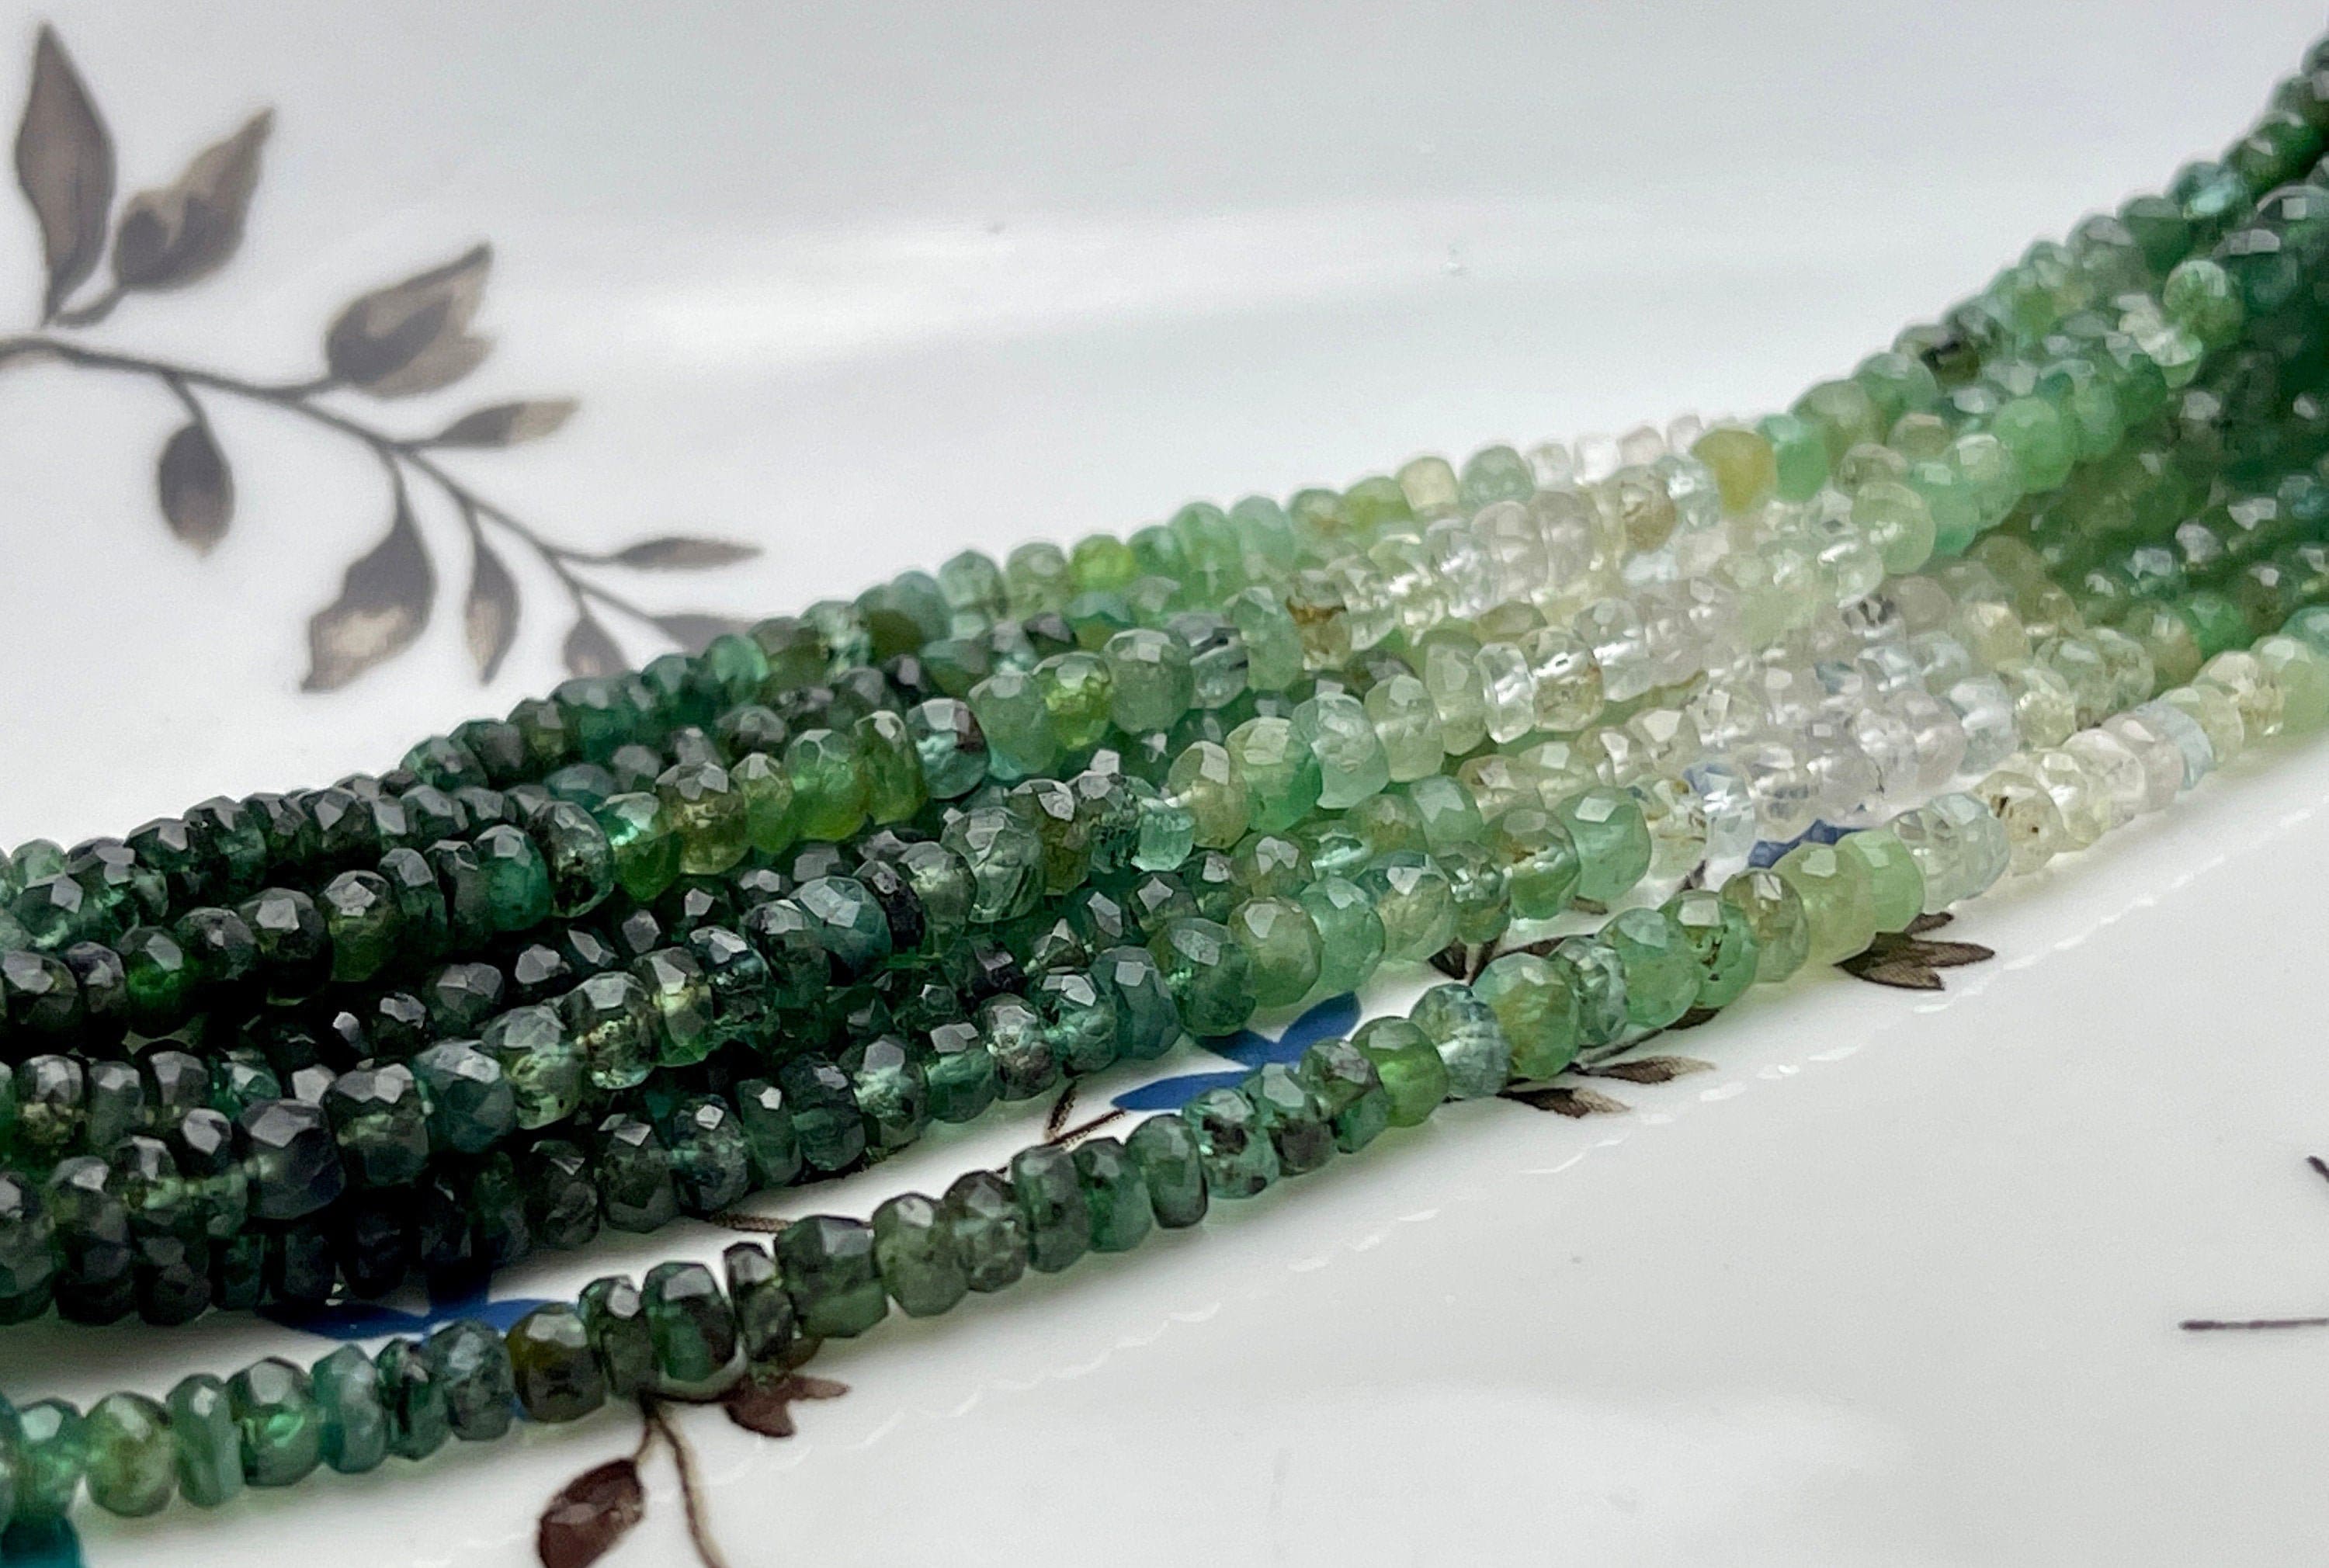 Green Jade Faceted Rondelle Beads, Green Jade Rondelle Beads, 4mm Green  Jade Beads, Jade Beads for Jewelry Making 15 Inches Strand 